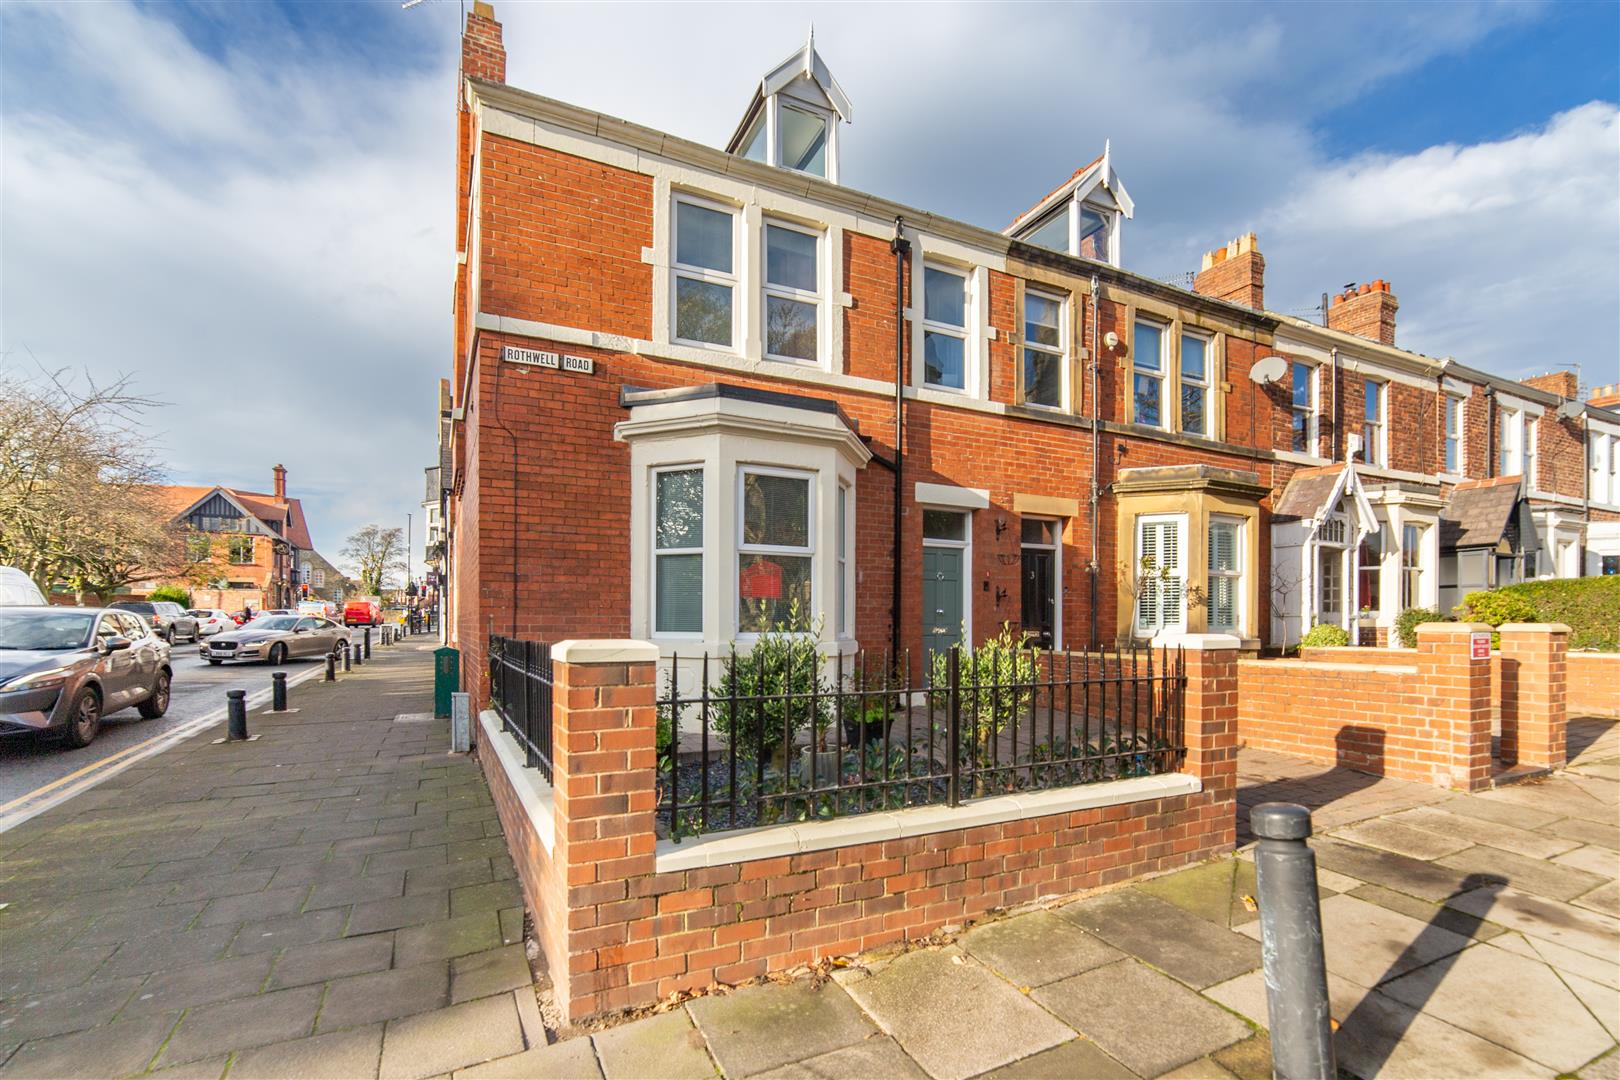 5 bed end of terrace house for sale in Rothwell Road, Newcastle Upon Tyne, NE3 